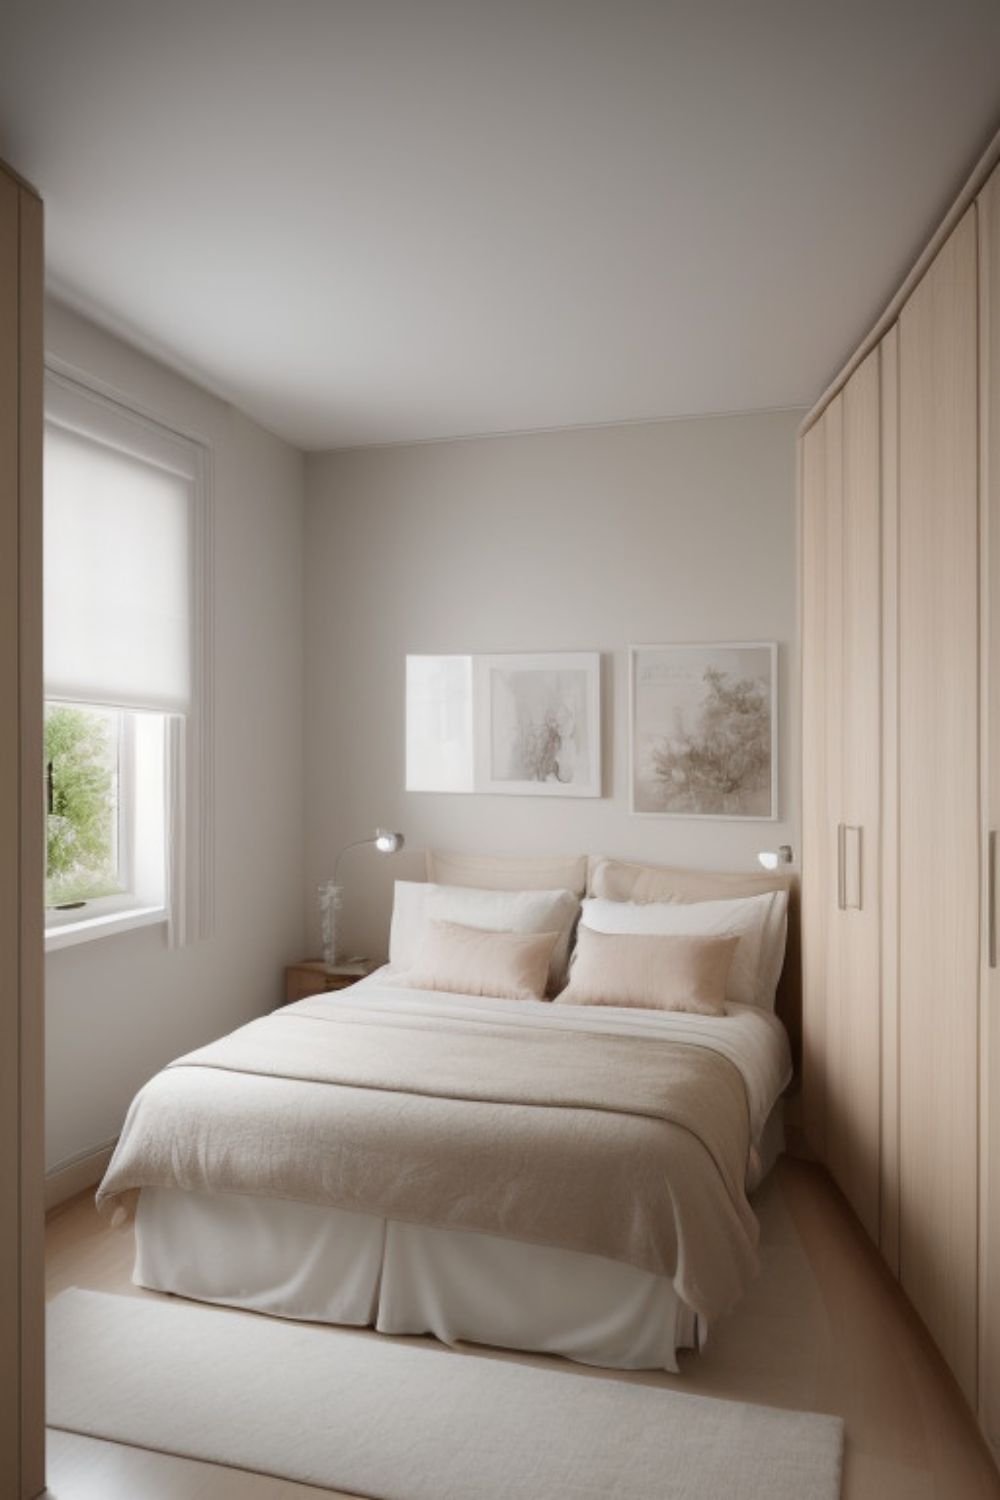 Cozy and Romantic: Small Bedroom Color Ideas for Couples